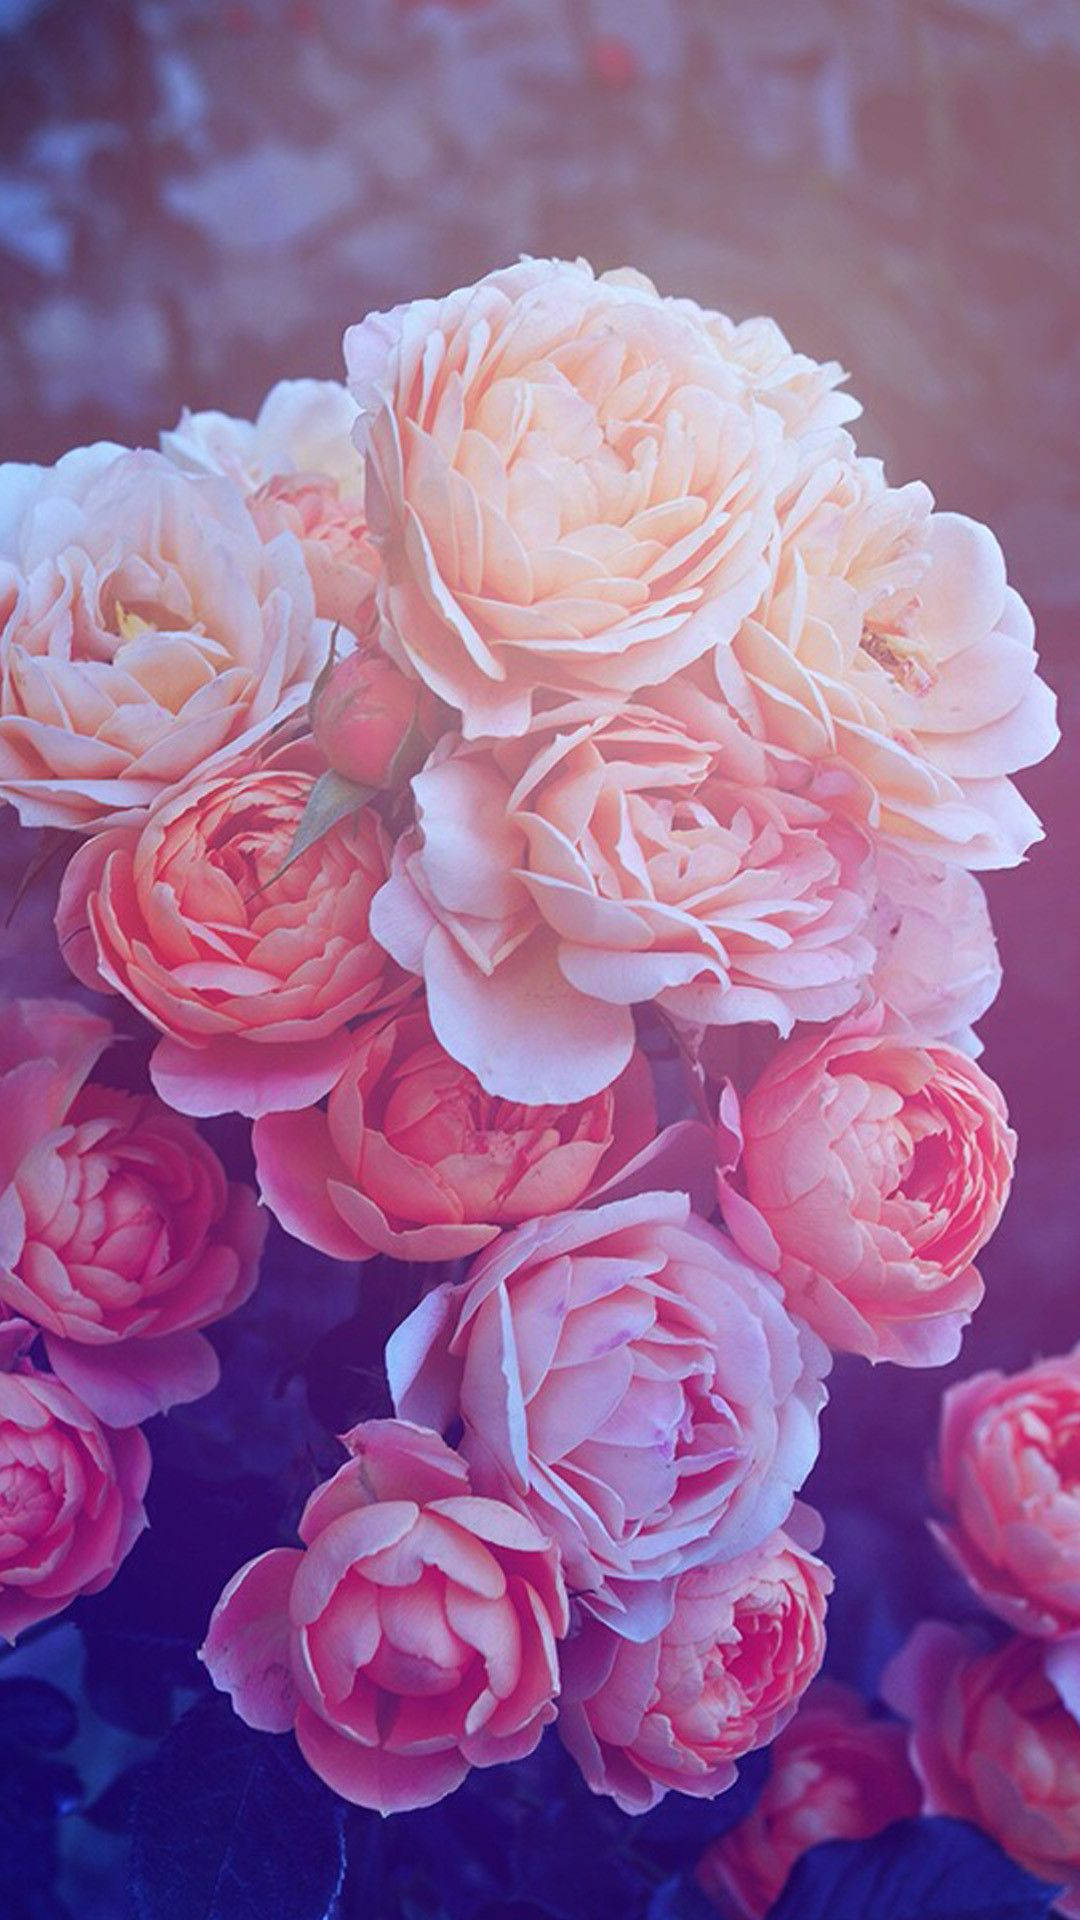 White, Peach And Pink Rose iPhone Background Wallpaper